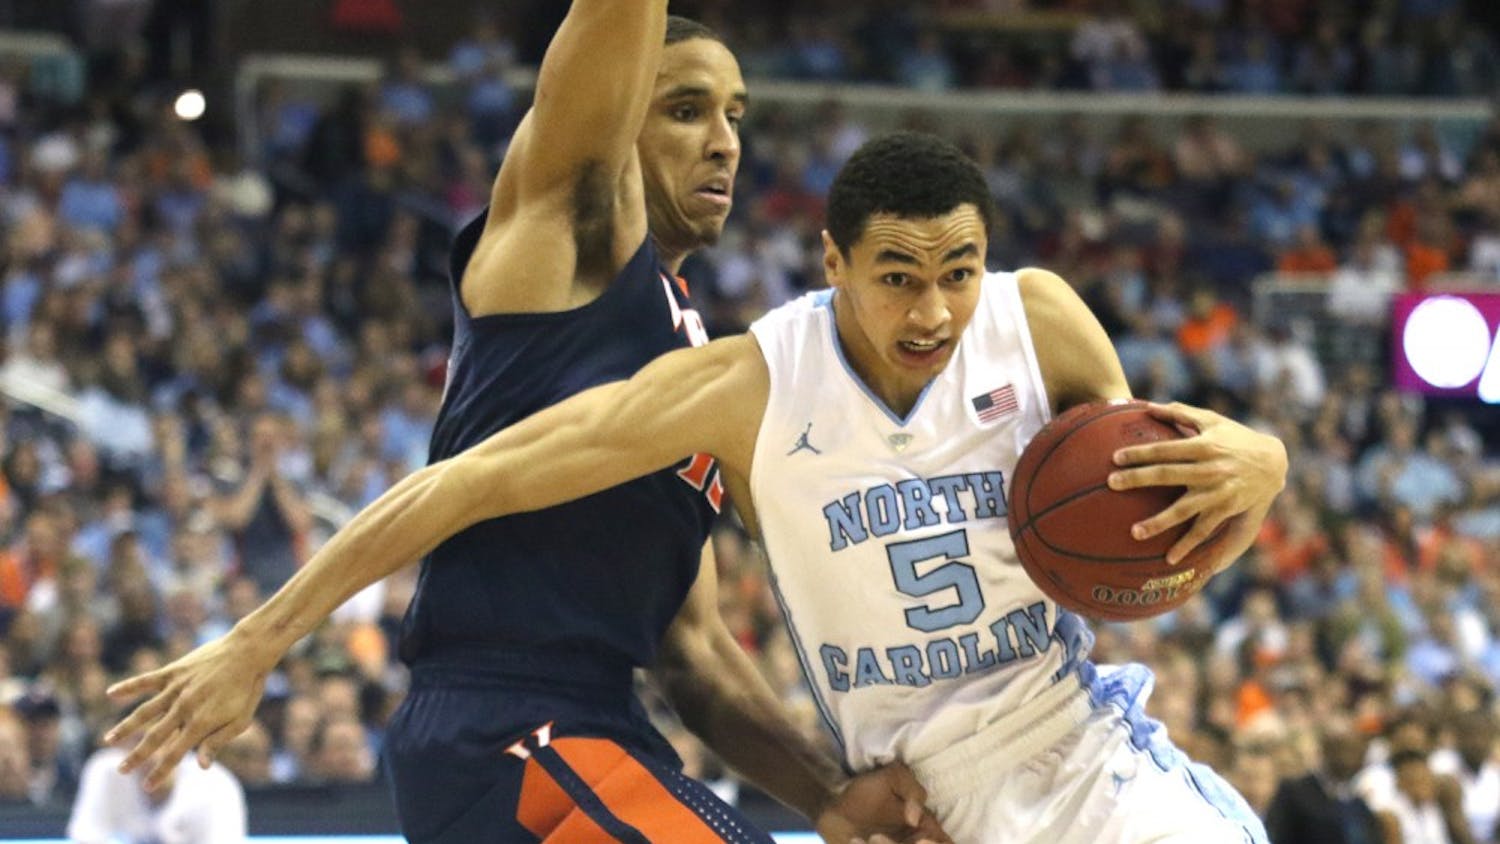 UNC basketball player Marcus Paige (5) moves past Virginia’s Malcom Brogdon (15) during the ACC tournament in Washington, DC.